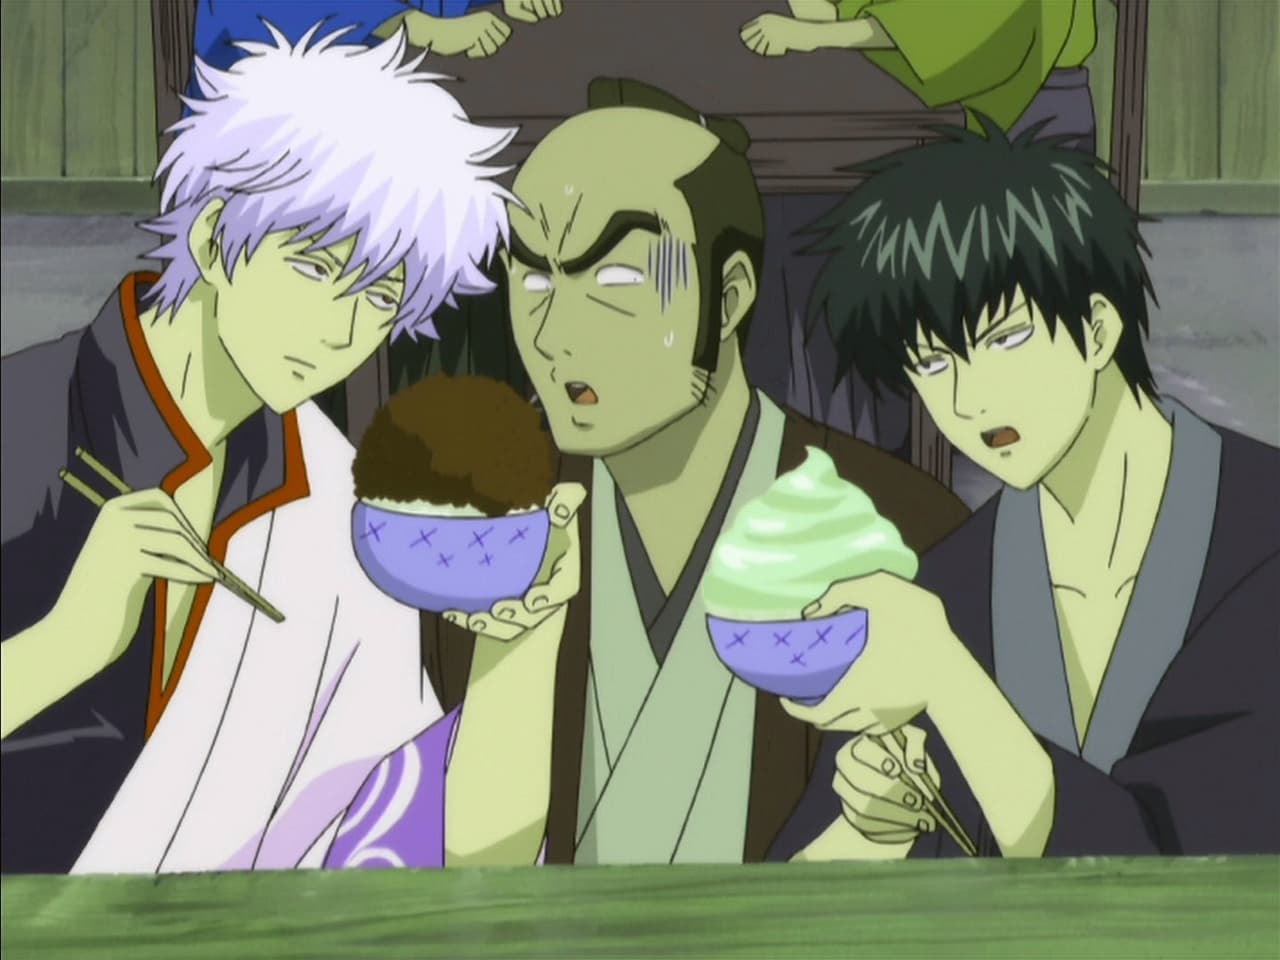 Gintama - Season 1 Episode 48 : The More You're Alike, the More You Fight / Whatever You Play, Play to Win